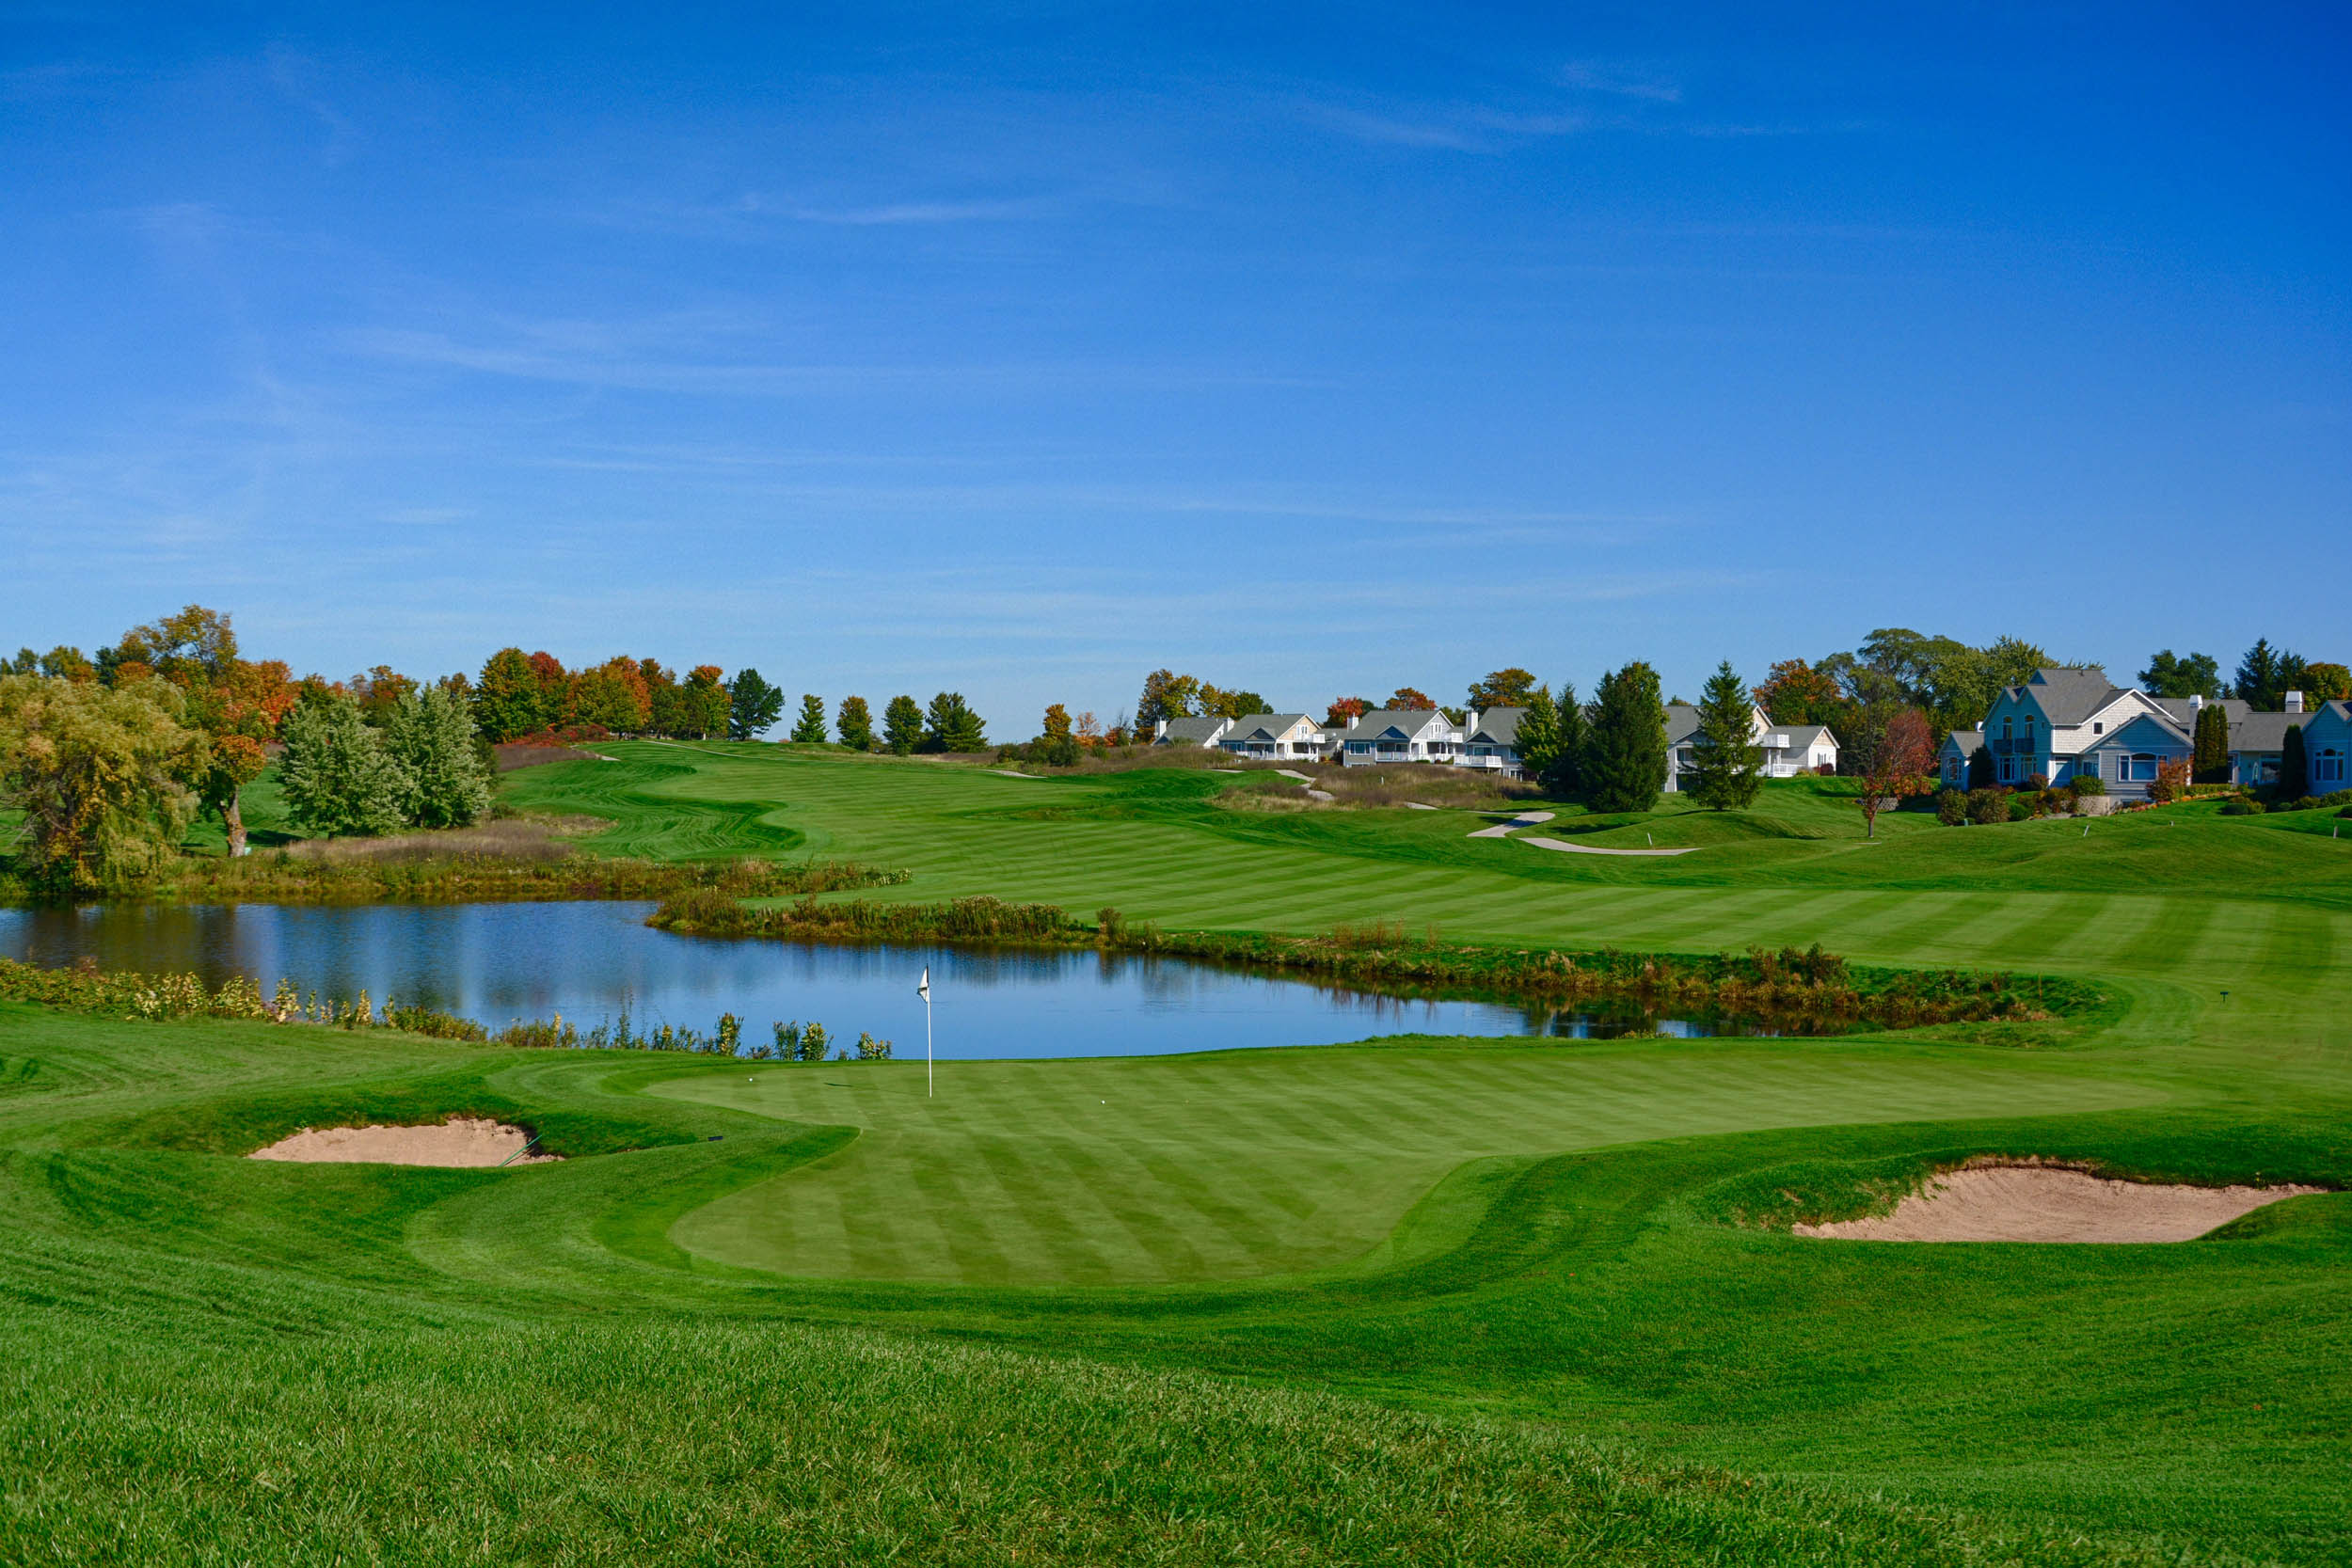 The Bear at Grand Traverse Resort: A Challenging Michigan Golf Course